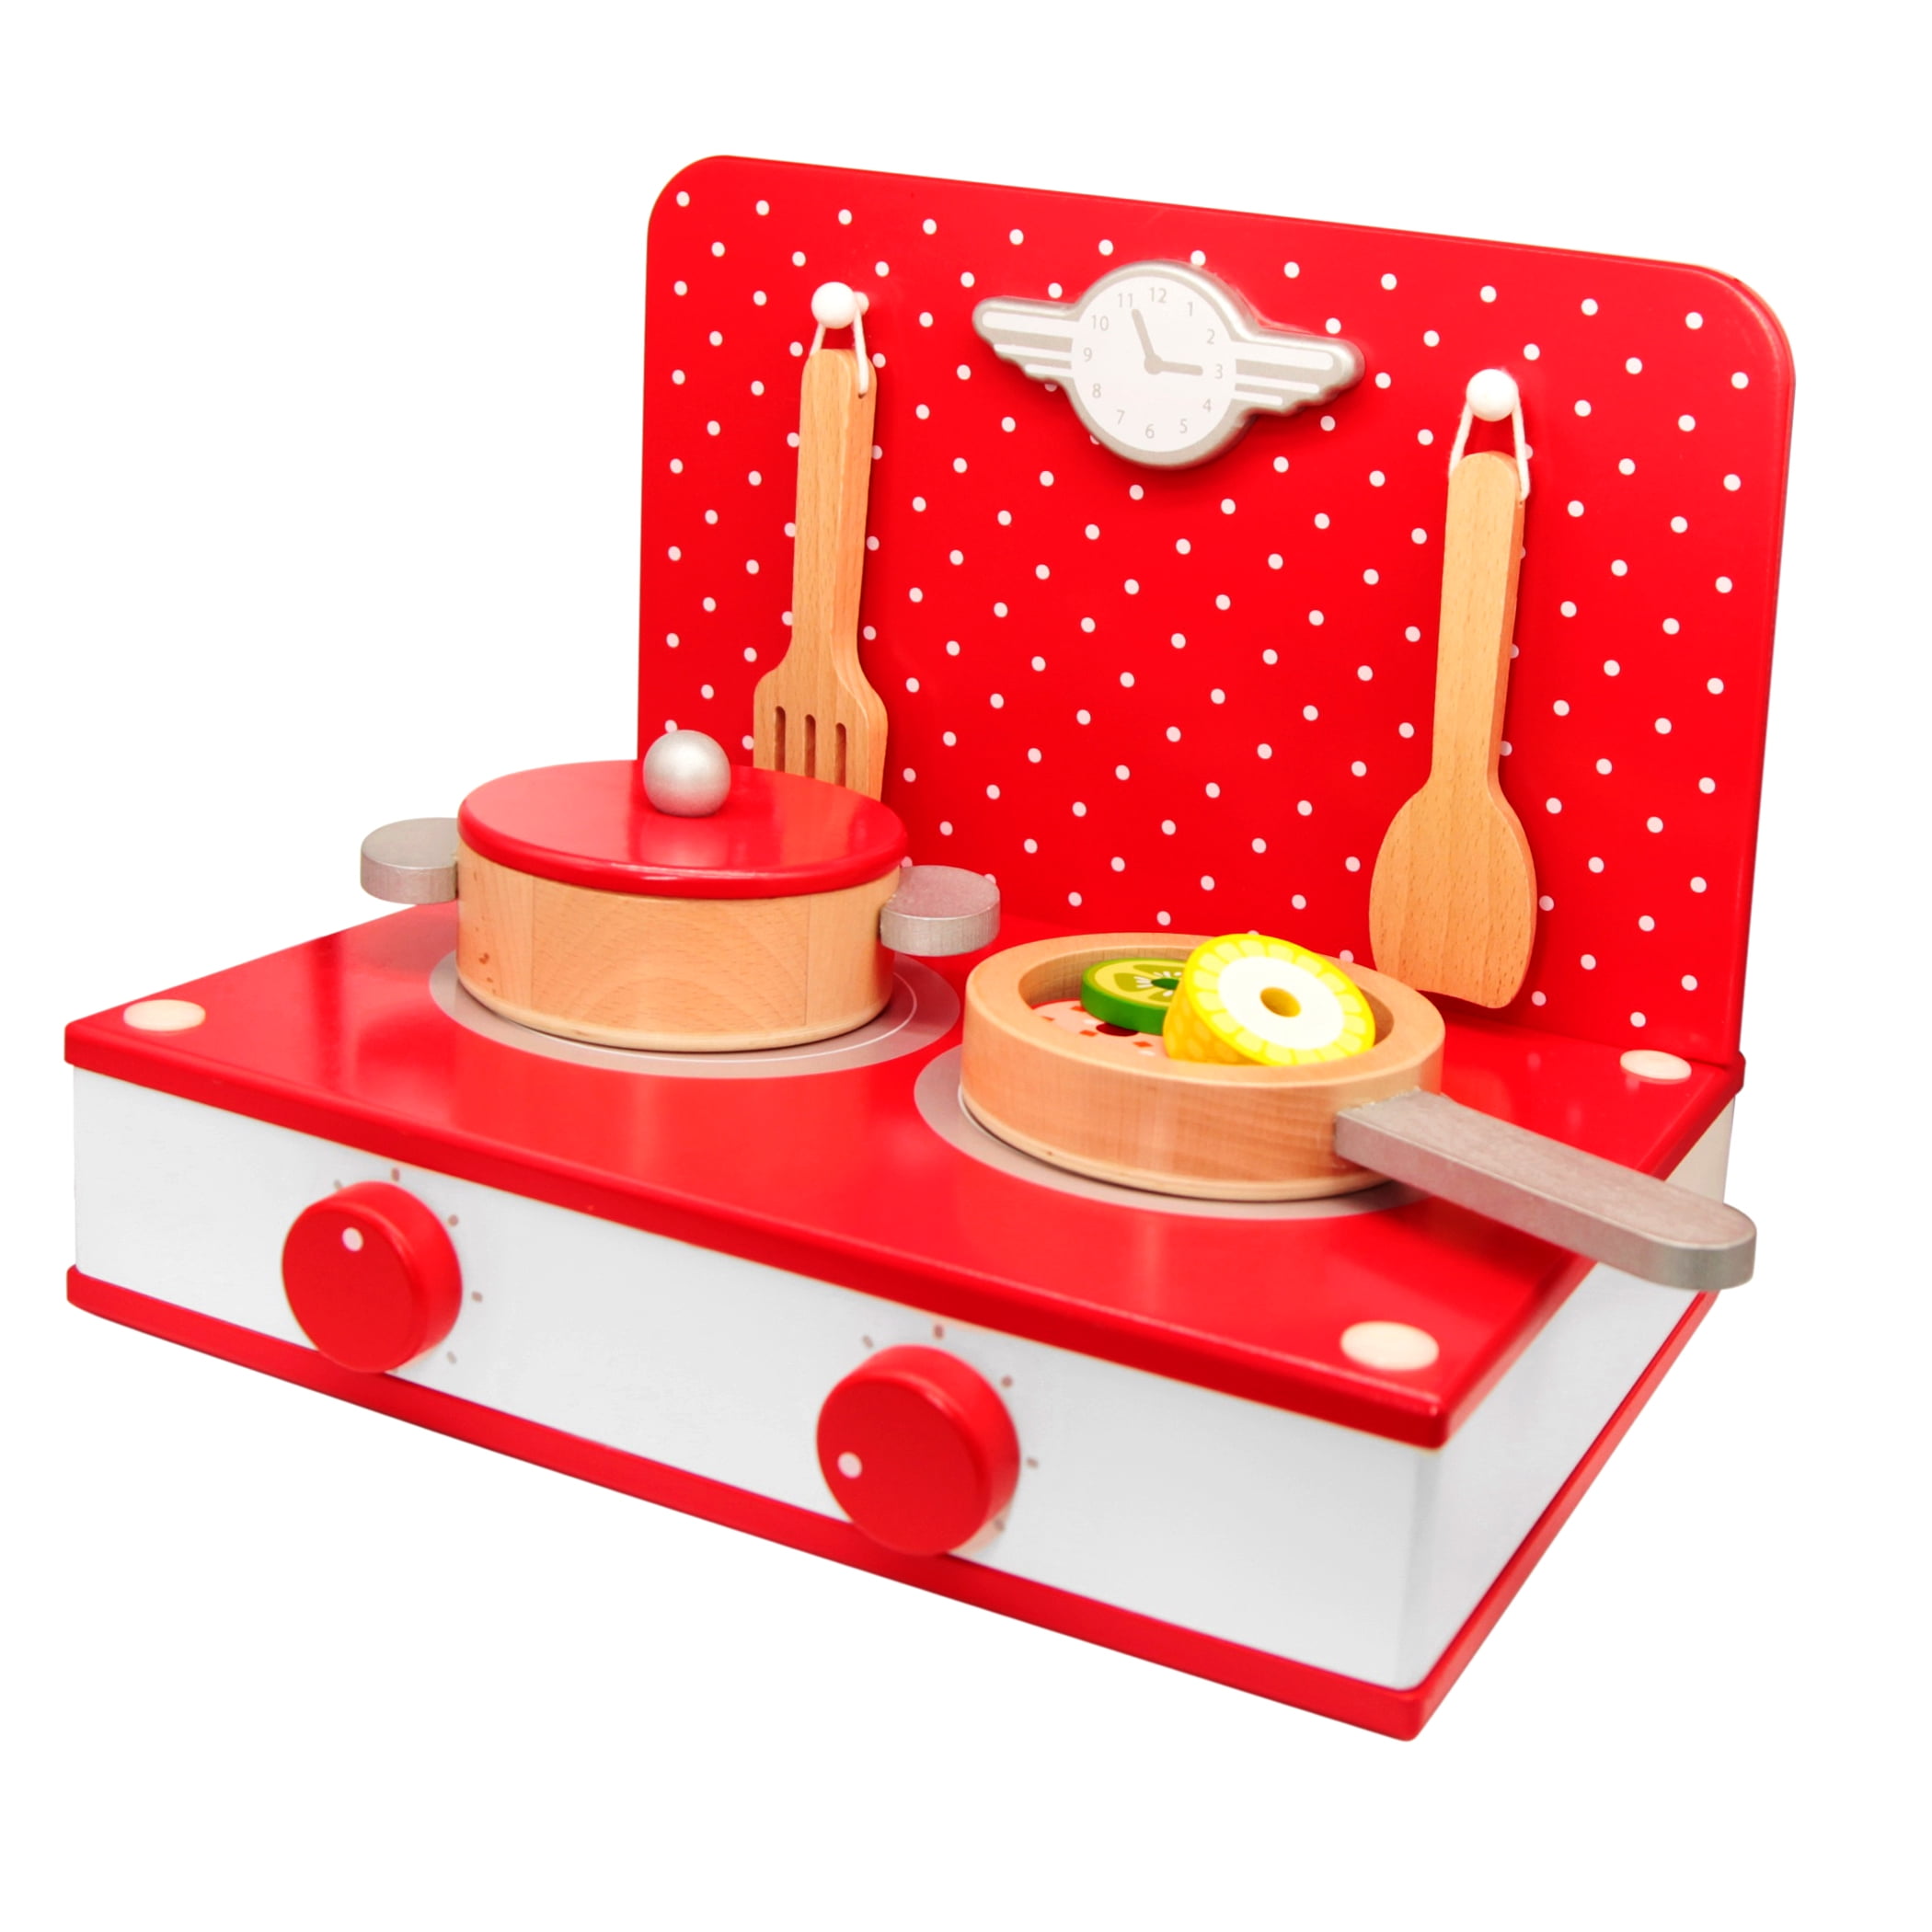  New Classic Toys Wooden Mixer Set Pretend Play Toy for Kids  Cooking Simulation Educational Toys and Color Perception Toy for Preschool  Age Toddlers Boys Girls , Red,White : Toys & Games